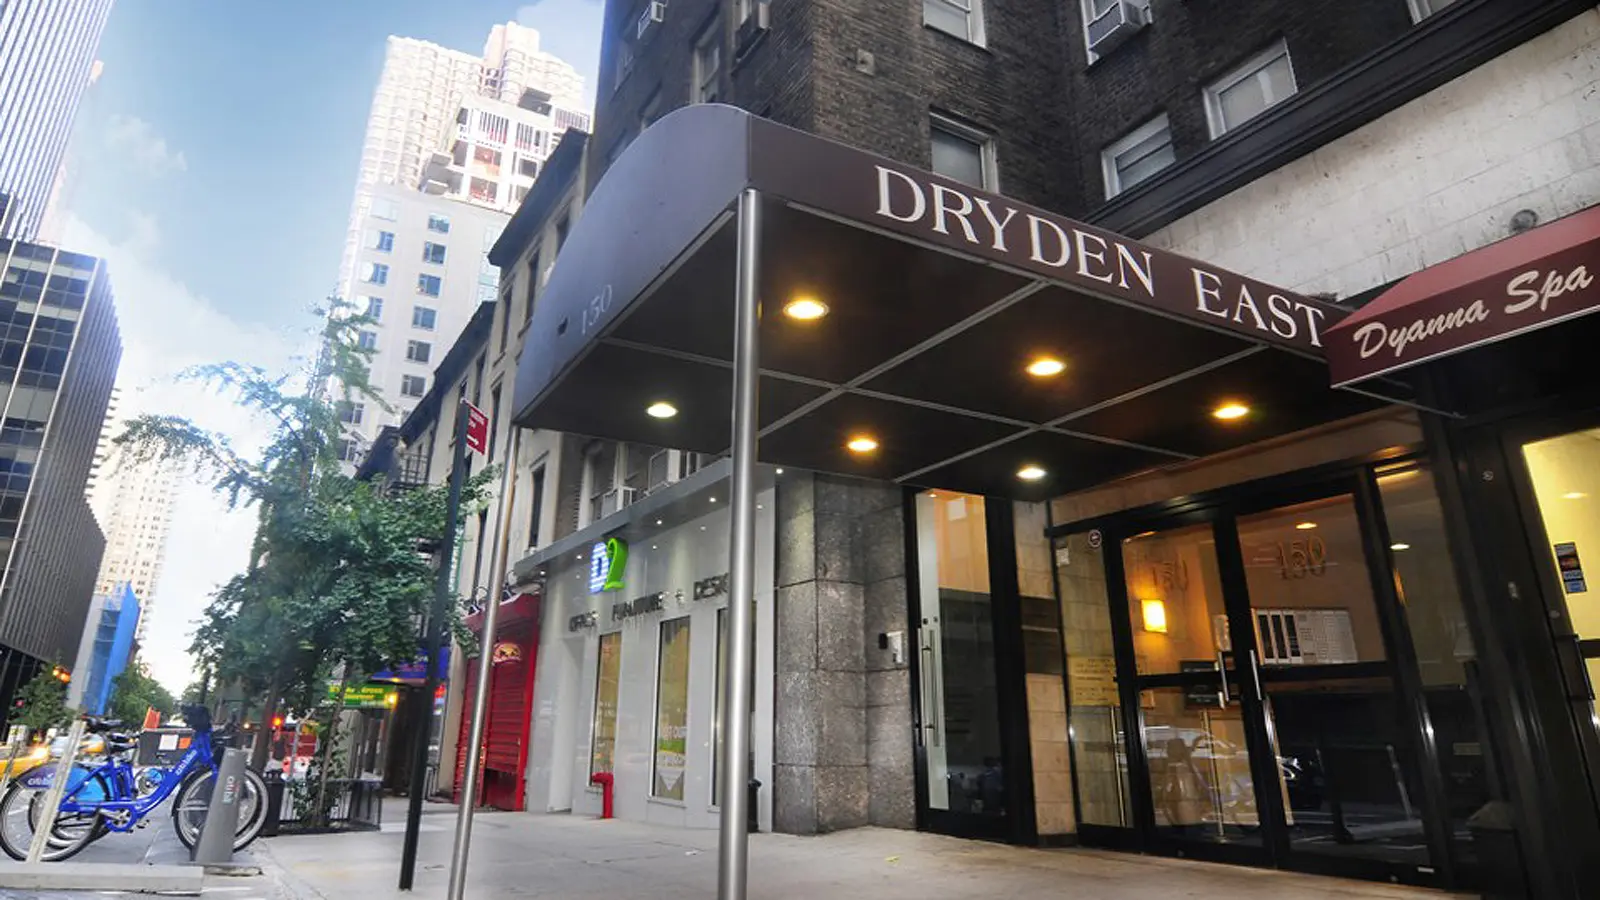 The Dryden East, 150 East 39th Street